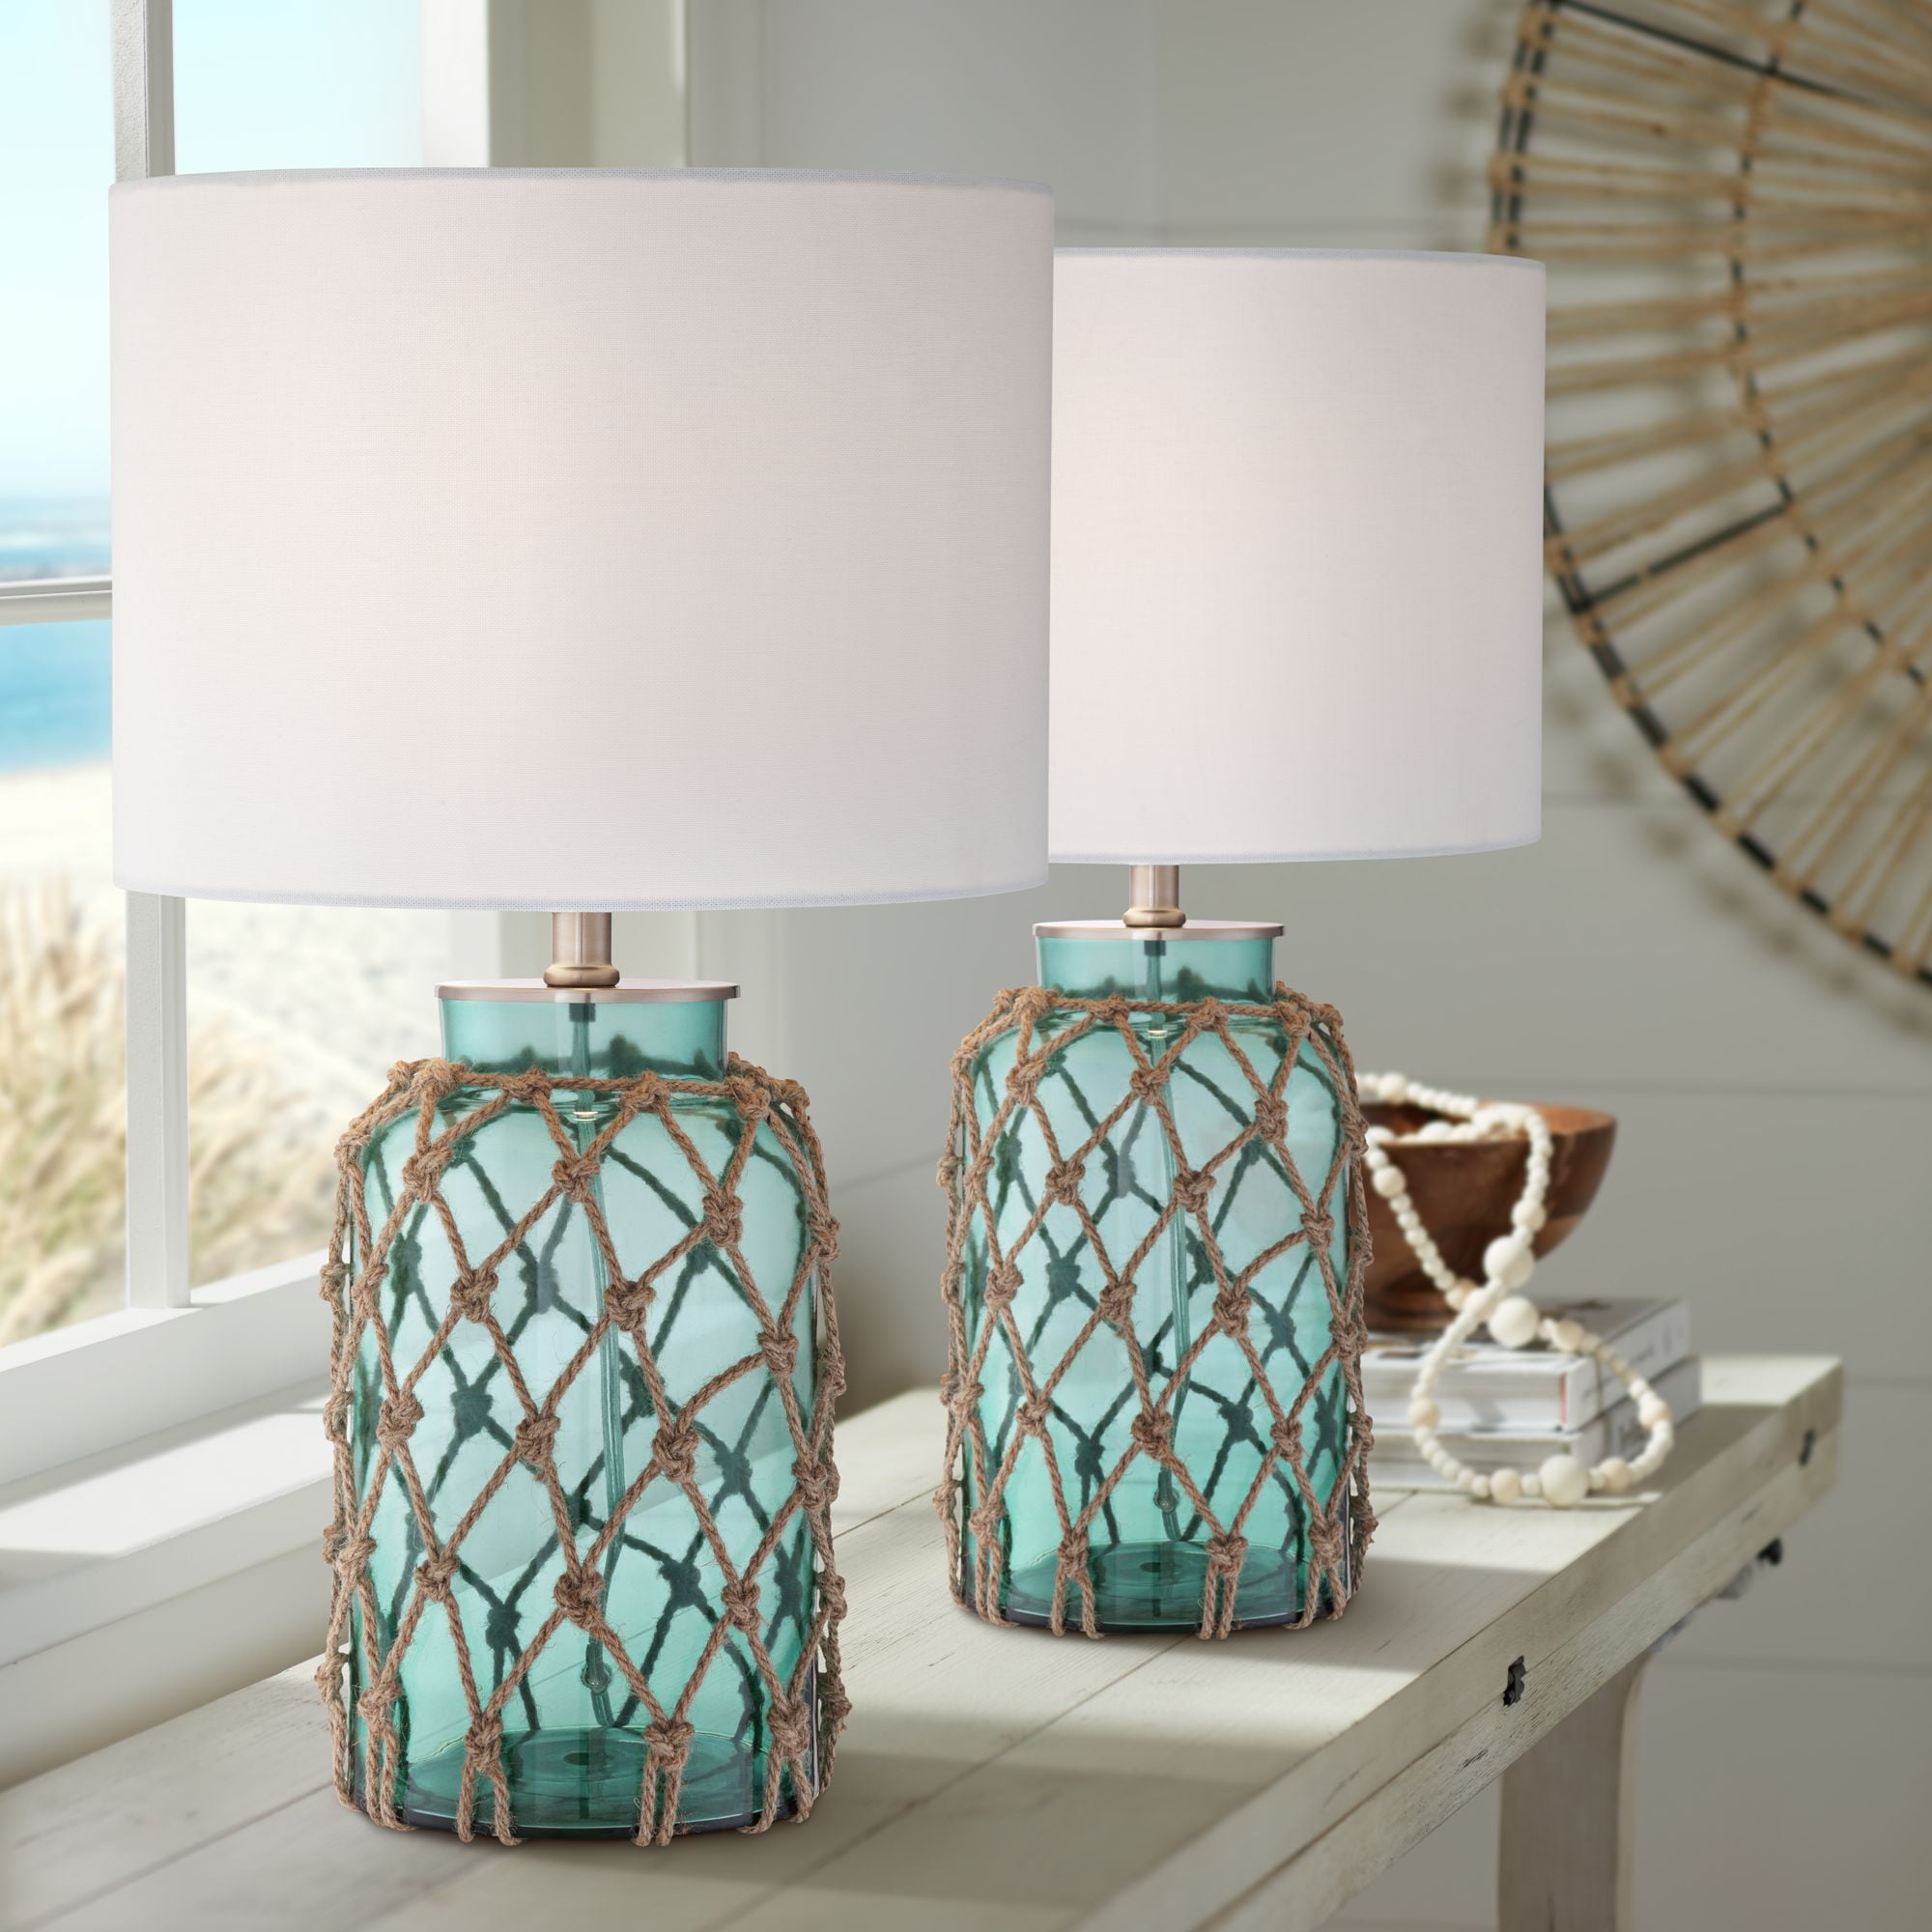 360 Lighting Nautical Accent Table, High End Table Lamps For Bedroom